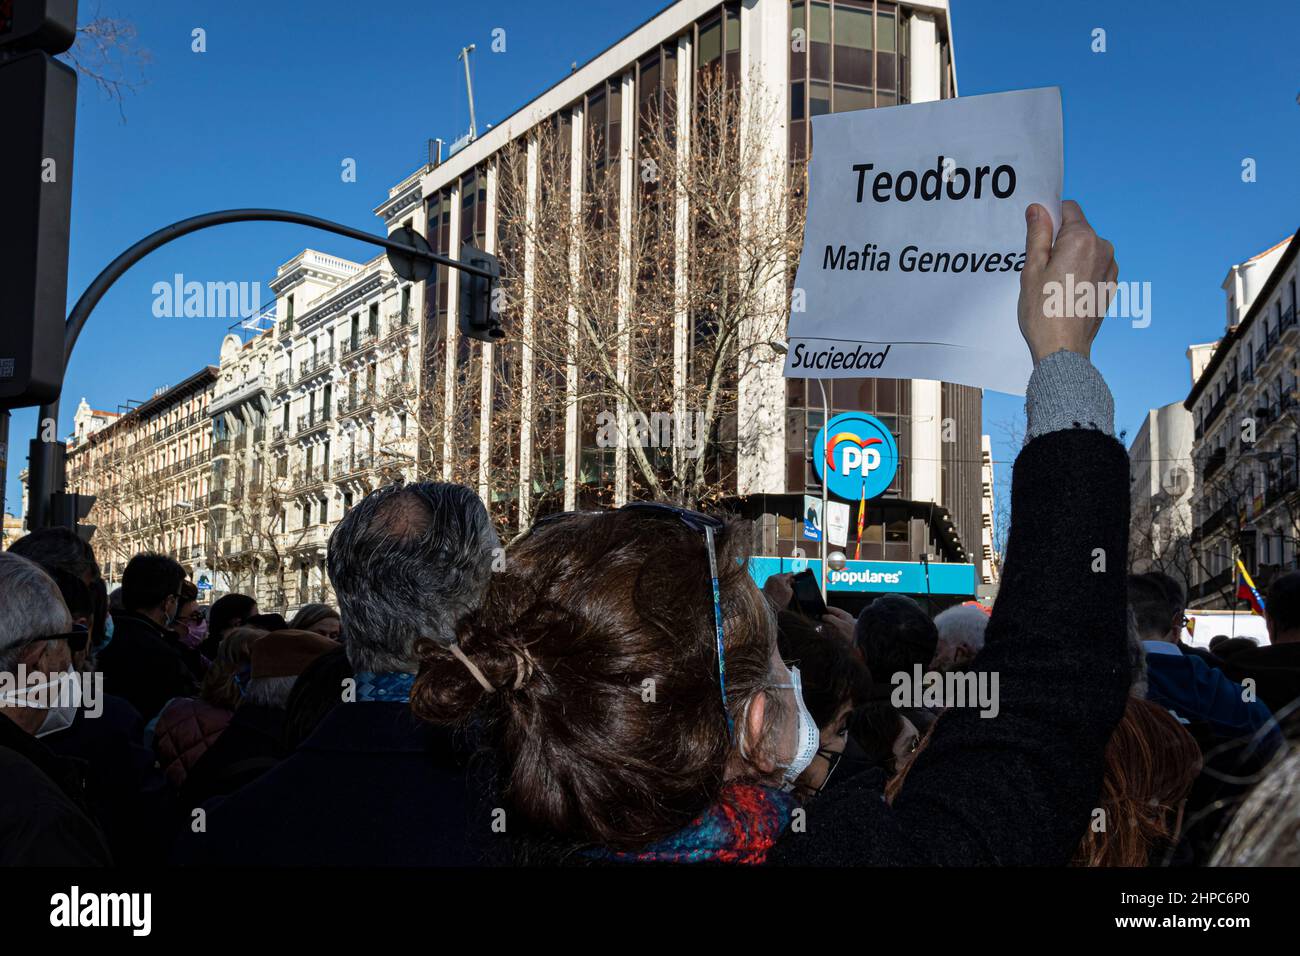 Madrid, Spain. 20th Feb, 2022. Demonstration at the national headquarters of the Partido Popular (PP) in favor of the president of the Community of Madrid and against the party's leader, Pablo Casado, due to the open leadership crisis between the two. © ABEL F. ROS/Alamy Live News Stock Photo